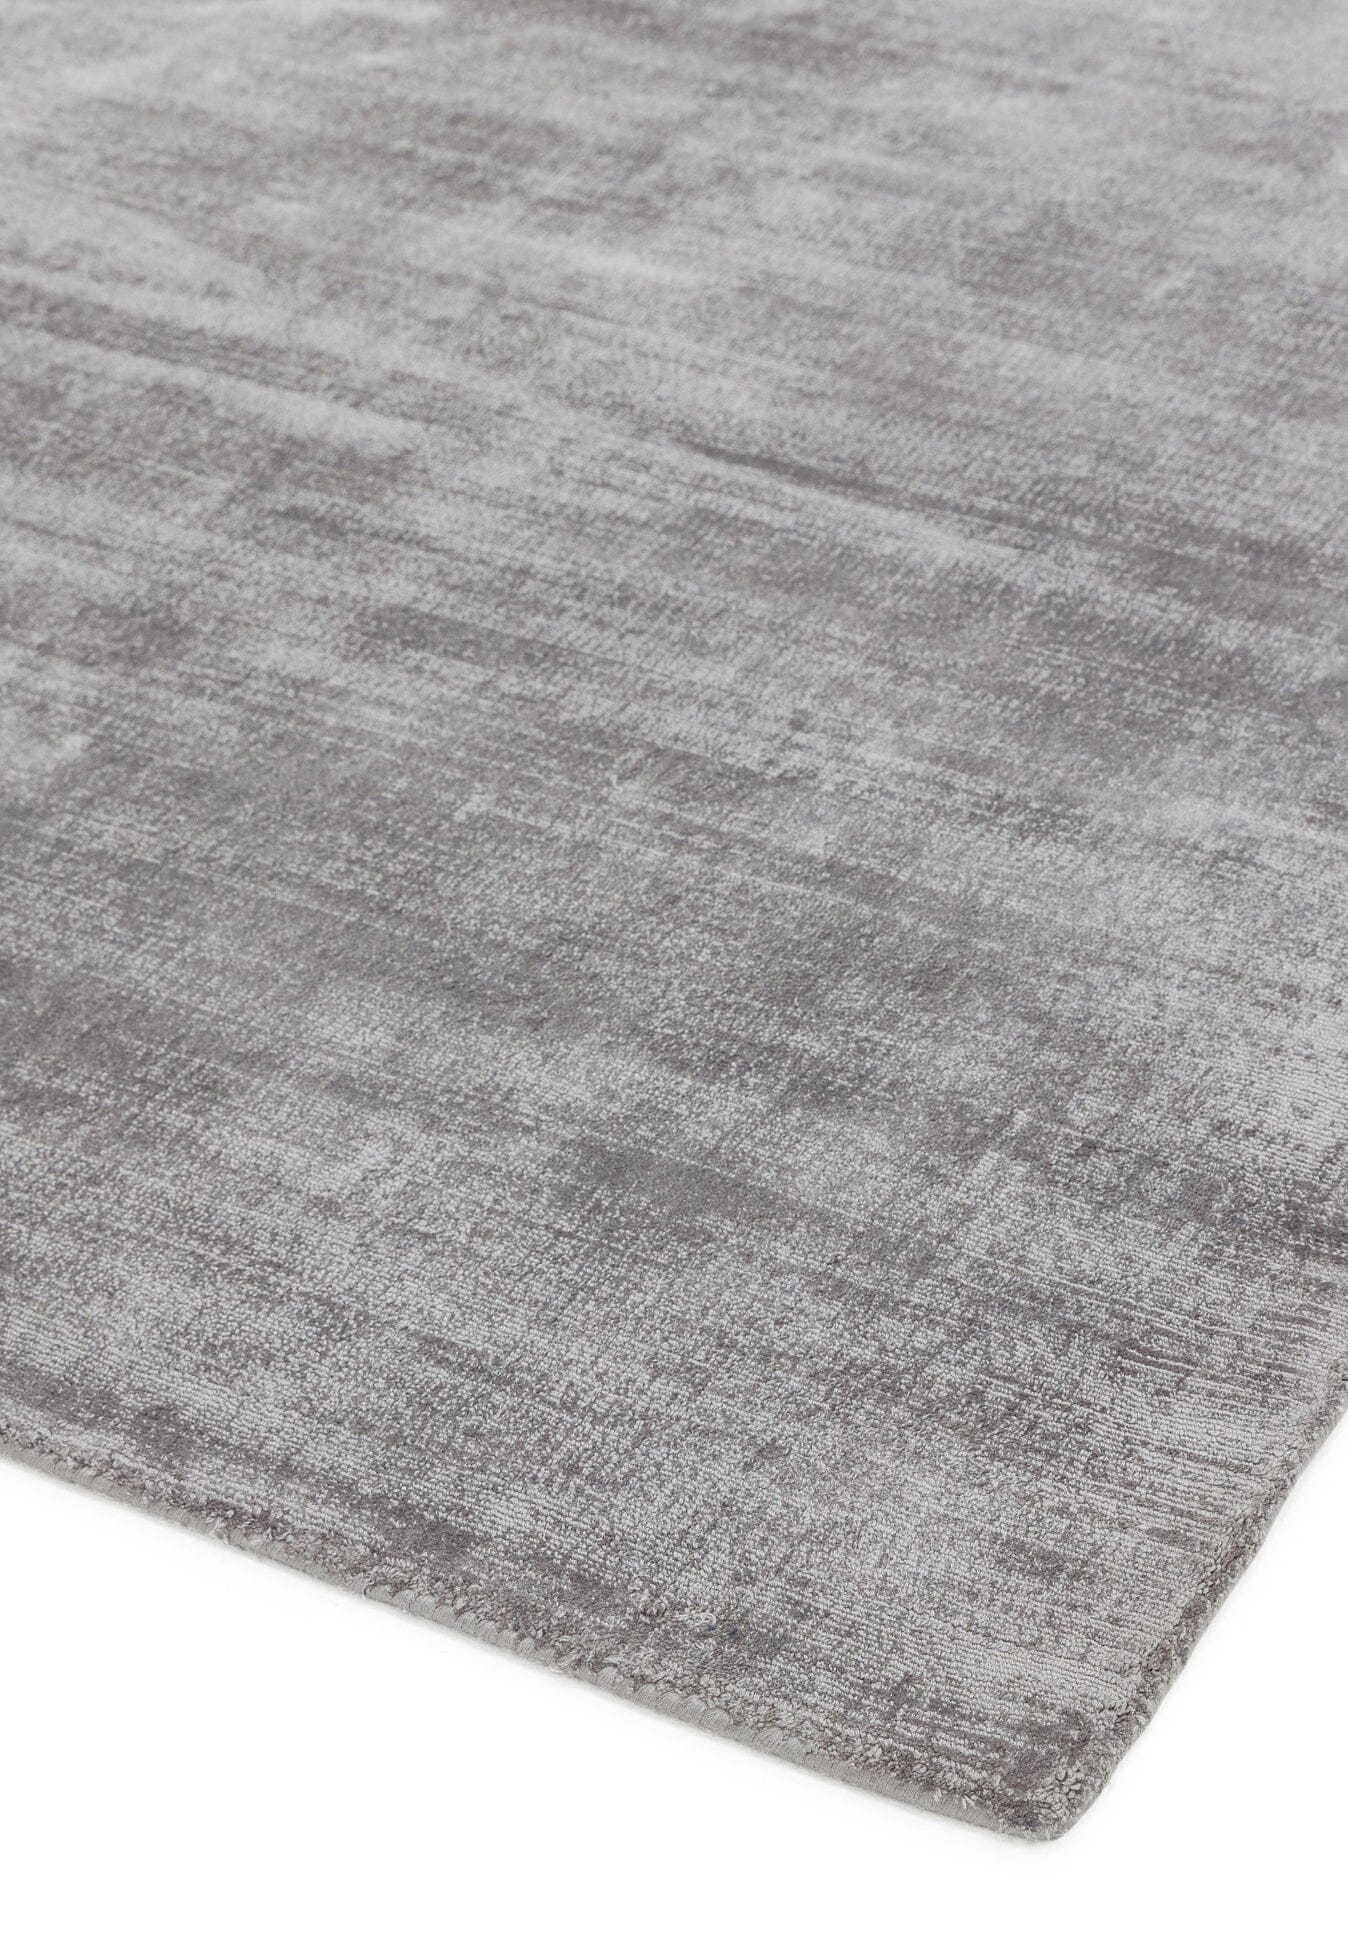 Asiatic Carpets Blade Hand Woven Rug Silver - 120 x 170cm